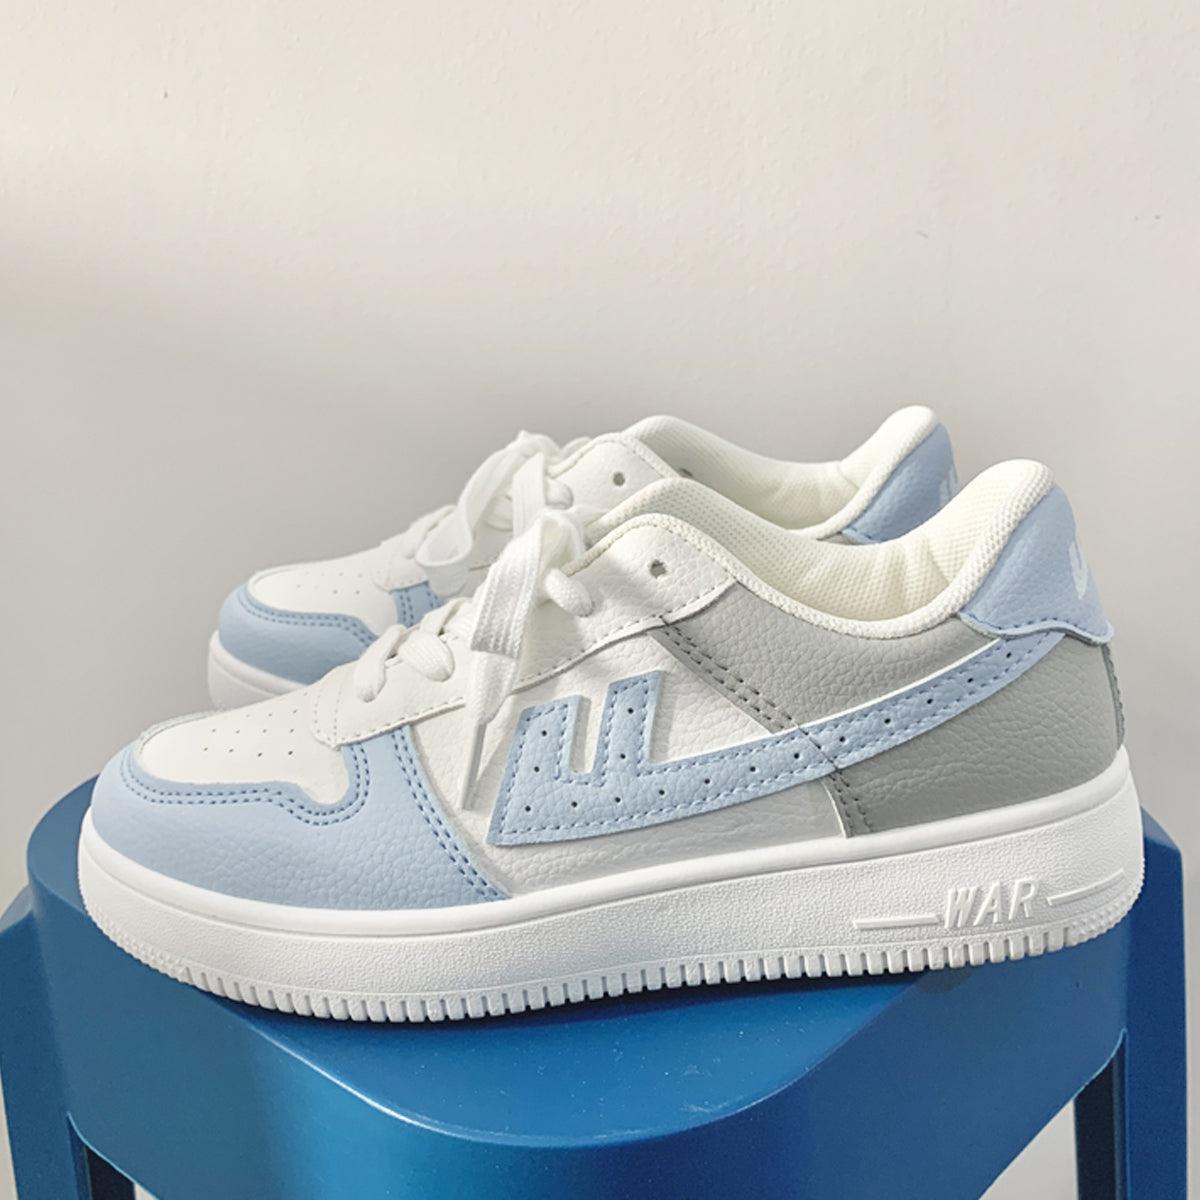 Pastel Blue Softie Aesthetic Sneakers - Aesthetic Clothes Shop